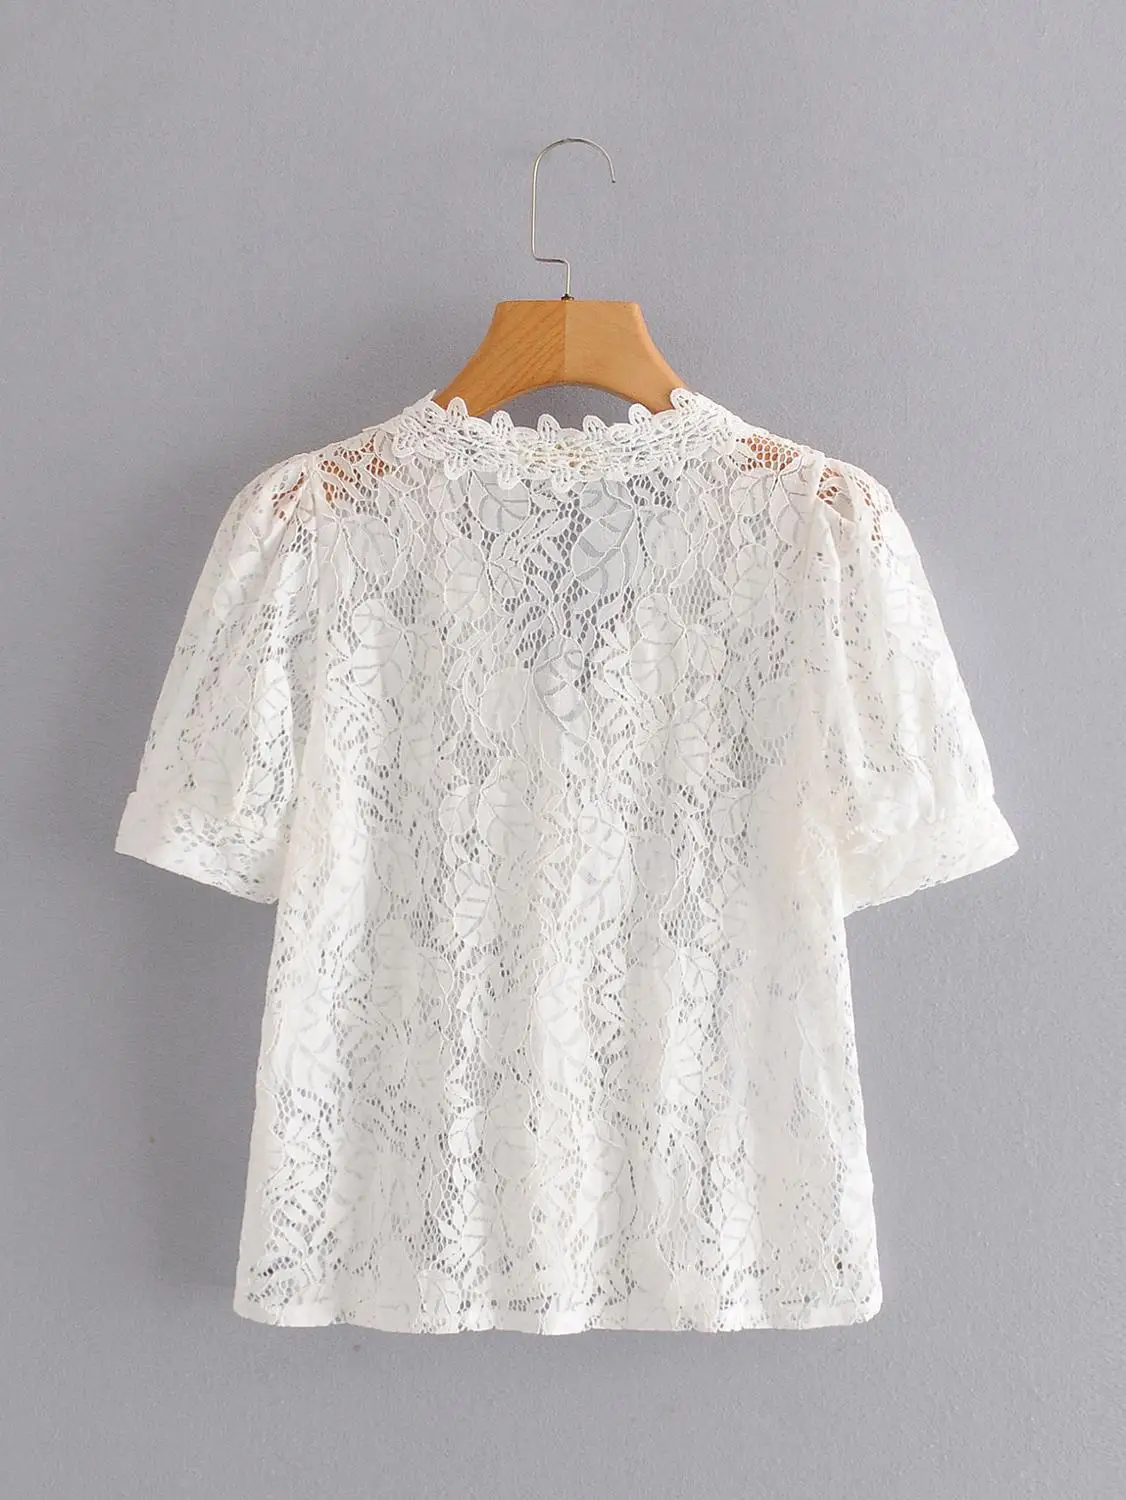 

Perspective Lace Blouse Women Korean Chic Solid V Neck Puff Sleeve Ladies Blusa Shirts Spring 2020 Fashion Casual Female Tops